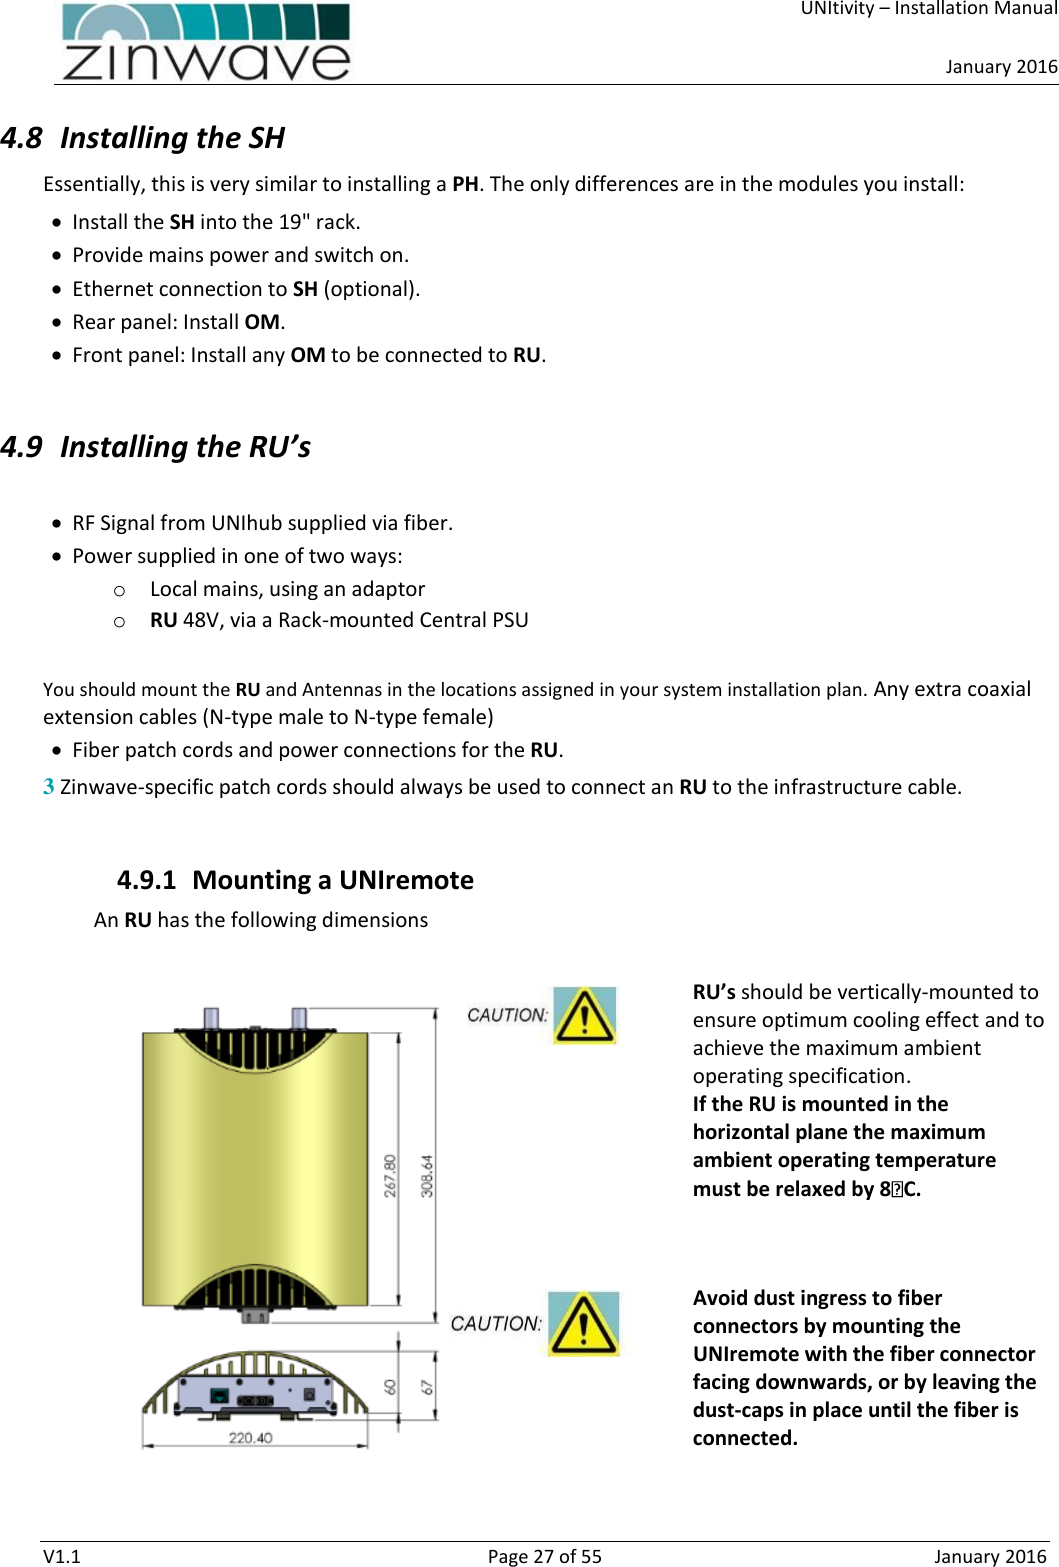     UNItivity – Installation Manual      January 2016  V1.1  Page 27 of 55  January 2016 4.8 Installing the SH  Essentially, this is very similar to installing a PH. The only differences are in the modules you install:  Install the SH into the 19&quot; rack.  Provide mains power and switch on.  Ethernet connection to SH (optional).  Rear panel: Install OM.   Front panel: Install any OM to be connected to RU.  4.9 Installing the RU’s   RF Signal from UNIhub supplied via fiber.   Power supplied in one of two ways: o Local mains, using an adaptor o RU 48V, via a Rack-mounted Central PSU  You should mount the RU and Antennas in the locations assigned in your system installation plan. Any extra coaxial extension cables (N-type male to N-type female)  Fiber patch cords and power connections for the RU. 3 Zinwave-specific patch cords should always be used to connect an RU to the infrastructure cable.  4.9.1 Mounting a UNIremote An RU has the following dimensions  RU’s should be vertically-mounted to ensure optimum cooling effect and to achieve the maximum ambient operating specification. If the RU is mounted in the horizontal plane the maximum ambient operating temperature must be relaxed by 8 C.   Avoid dust ingress to fiber connectors by mounting the UNIremote with the fiber connector facing downwards, or by leaving the dust-caps in place until the fiber is connected.   